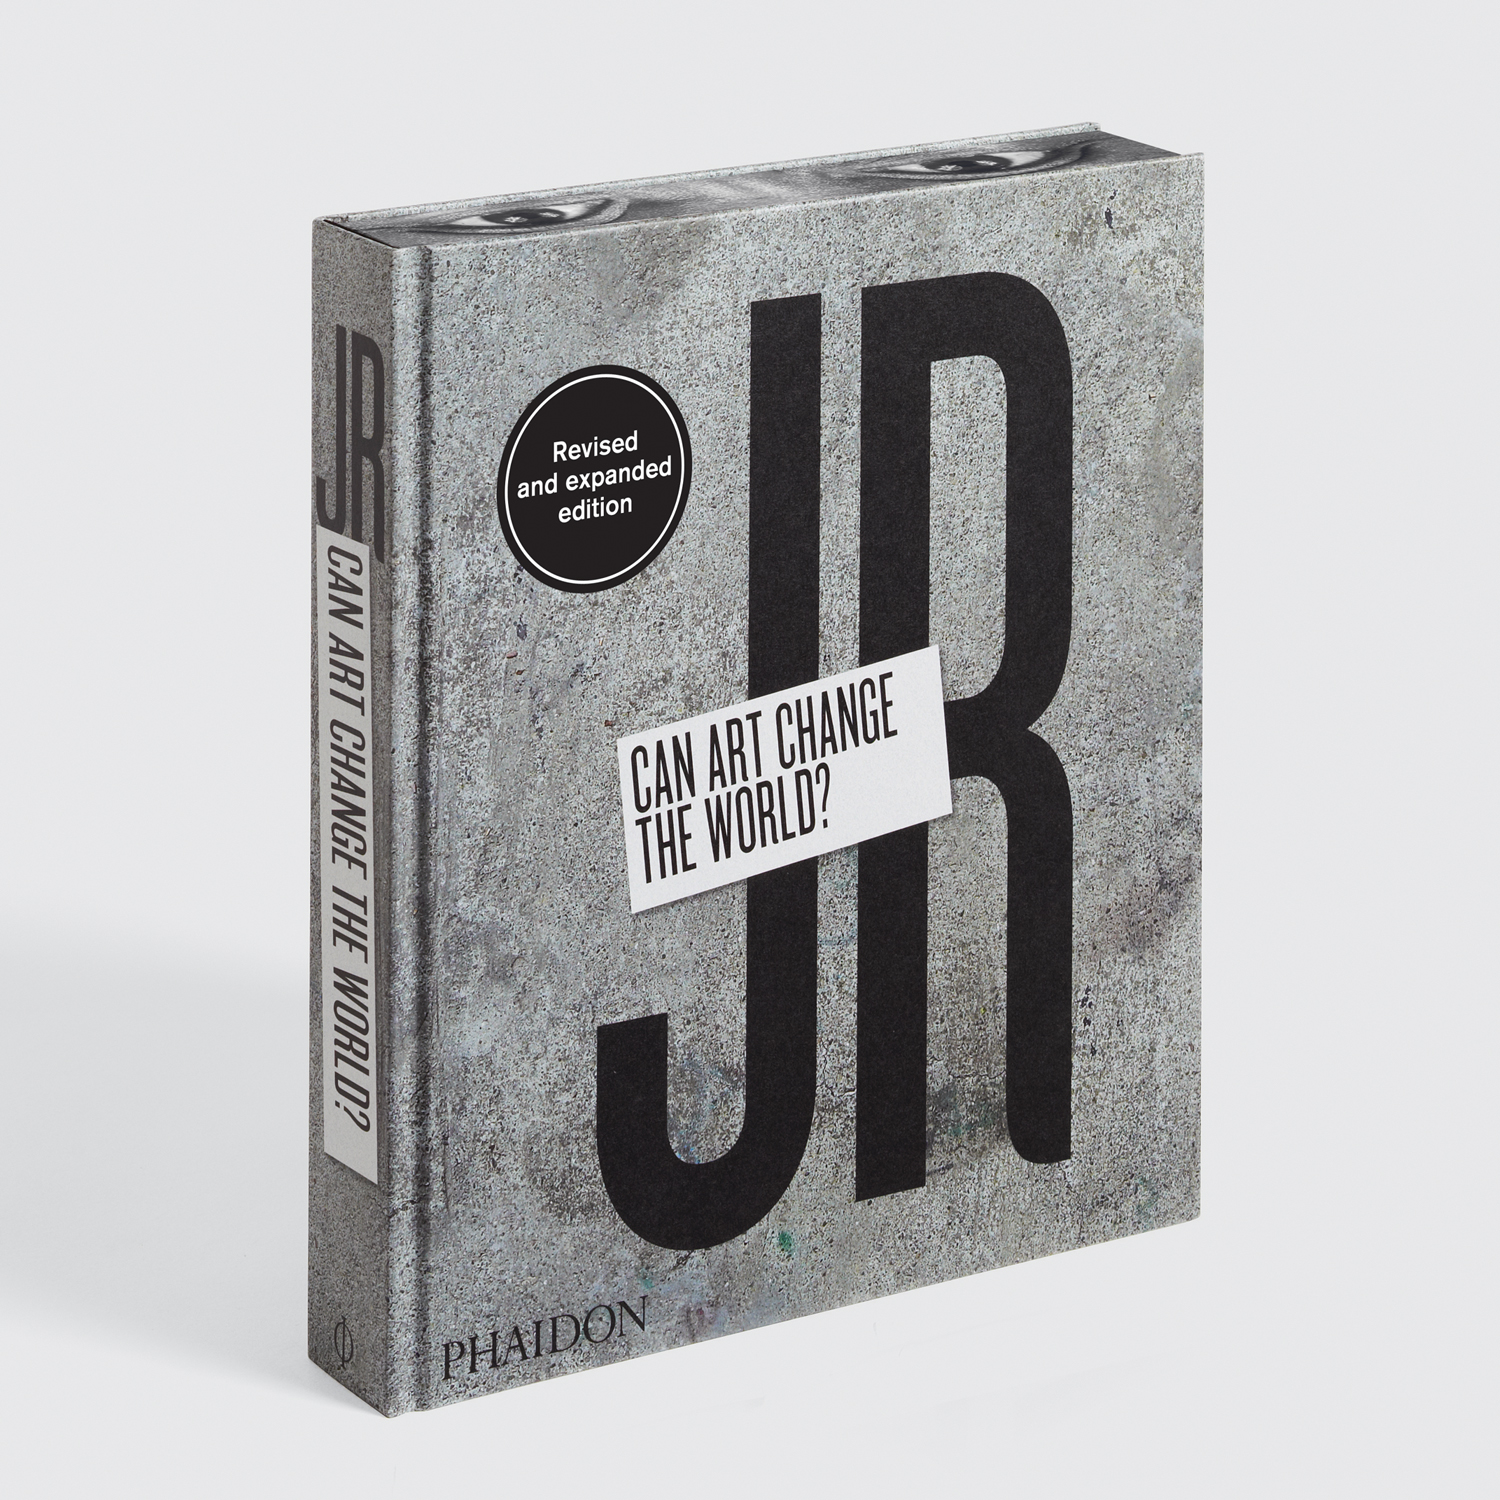 Our newly updated, revised and expanded edition of JR: Can Art Change the World?